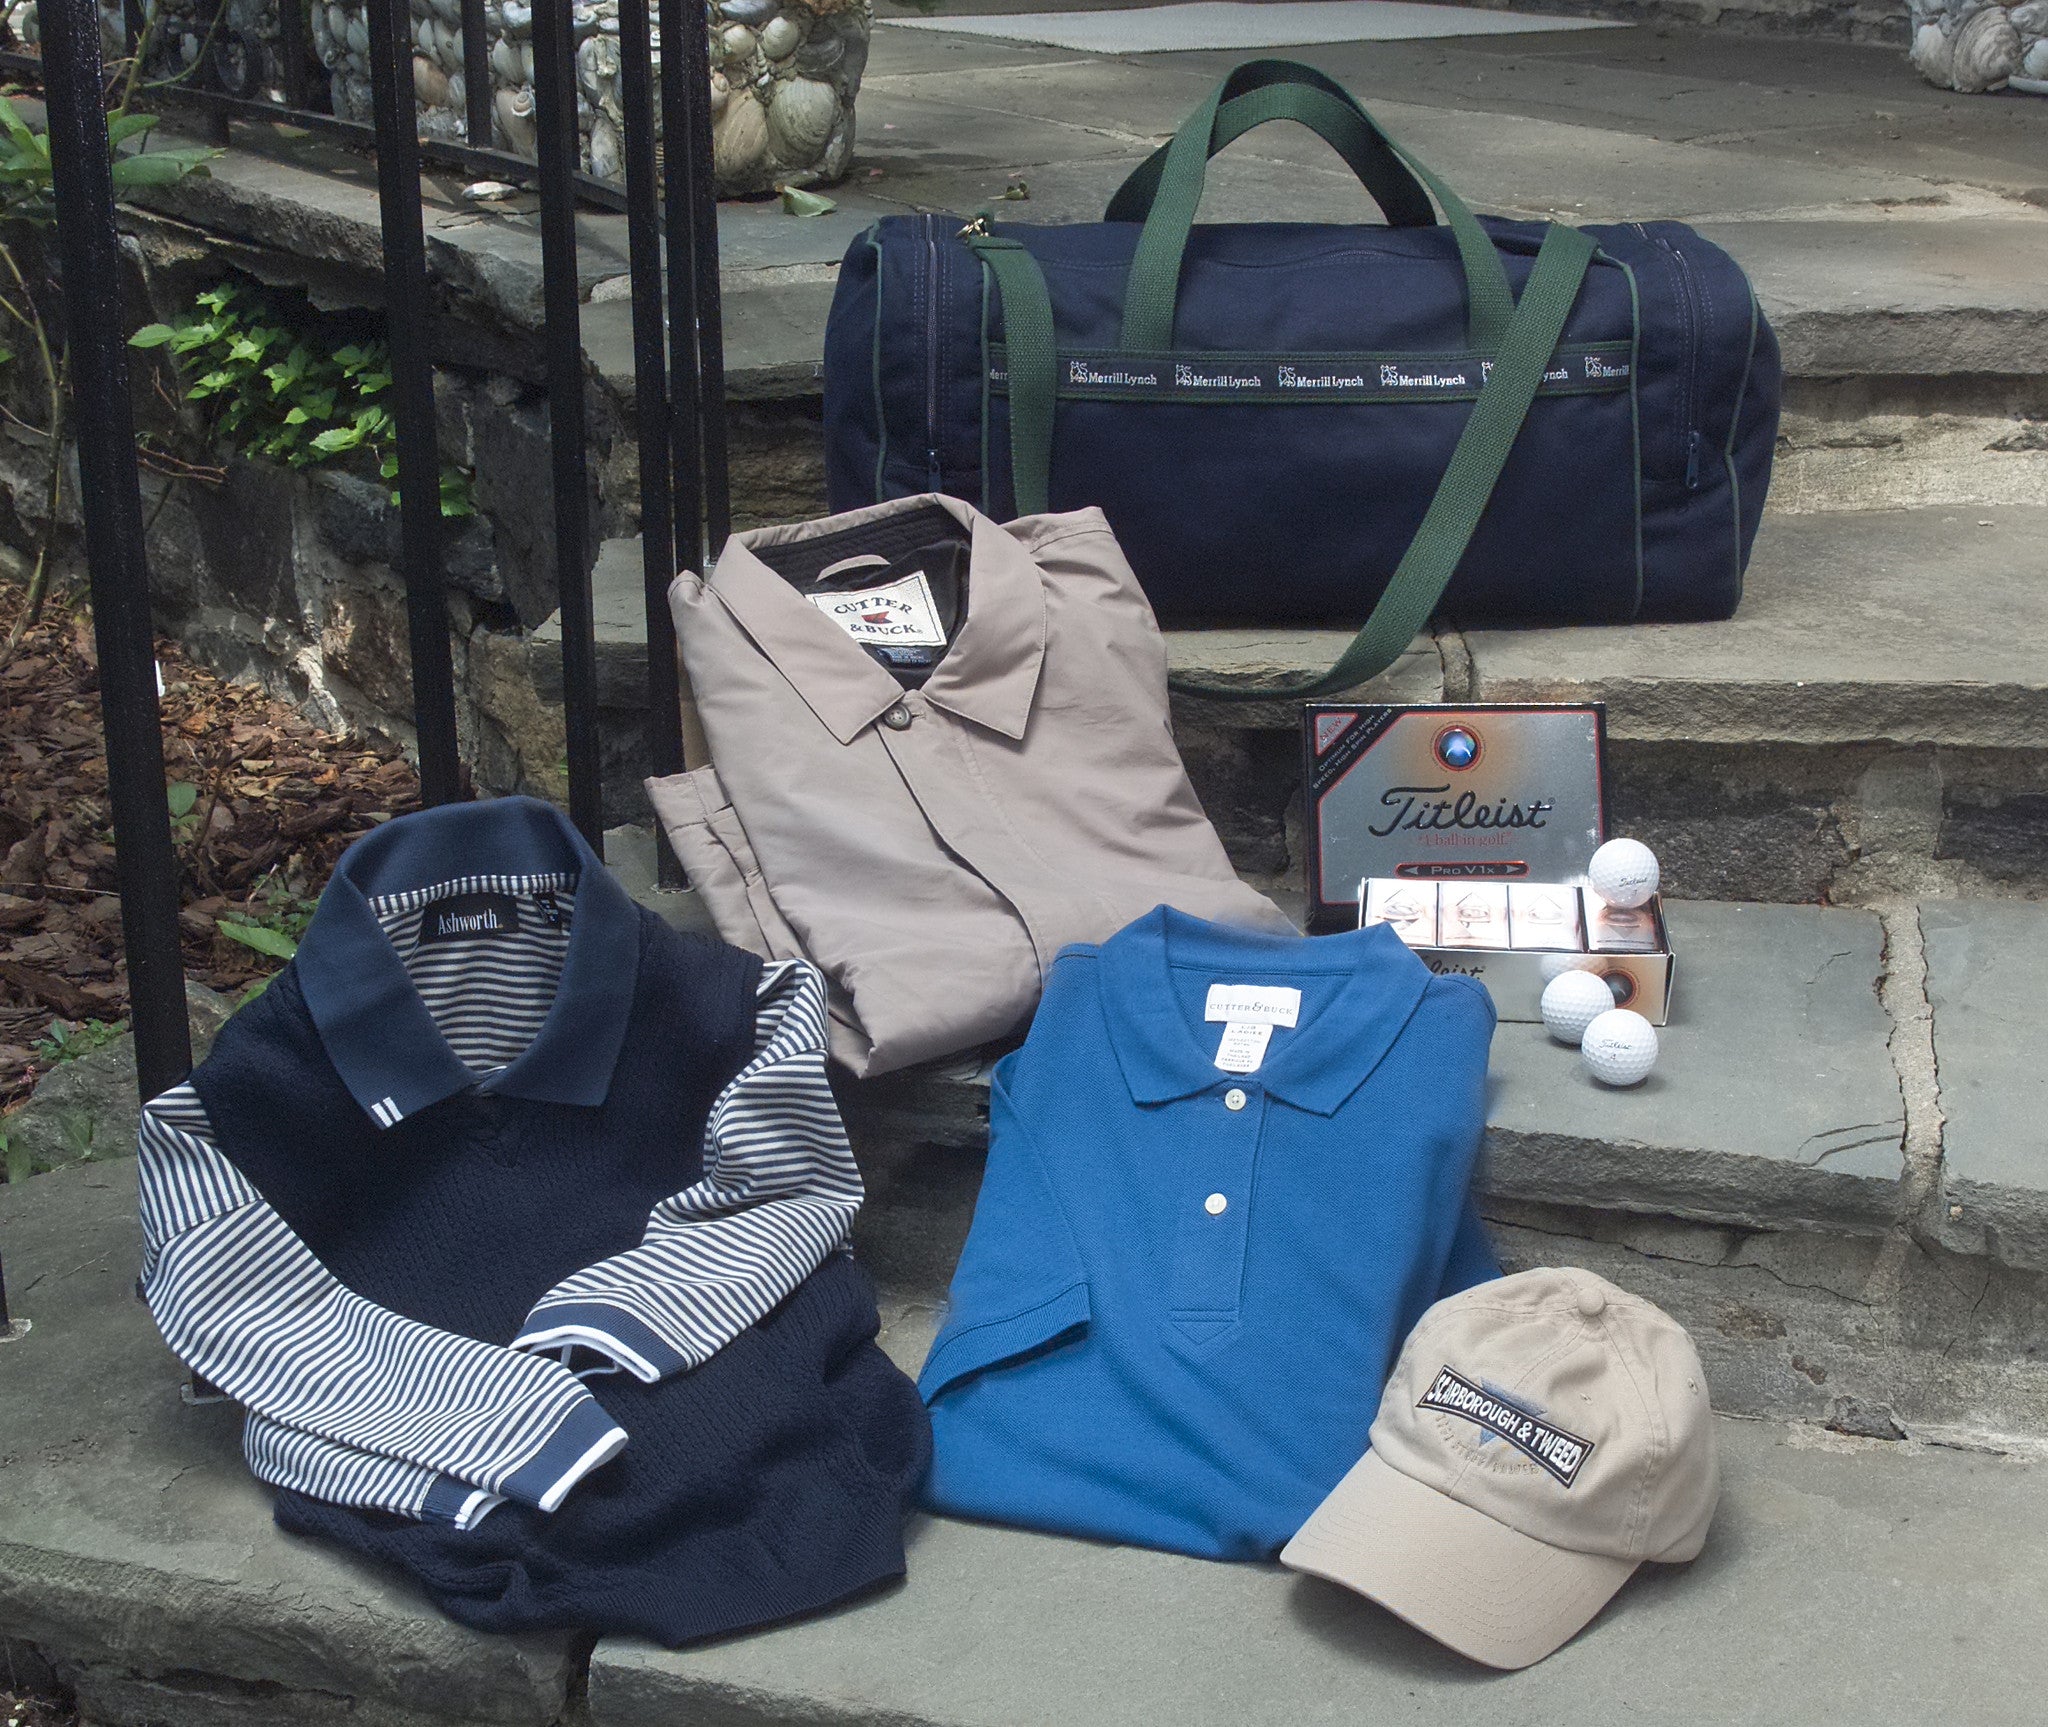 Scarborough & Tweed to Showcase Golf Bags That Give Back at PGA Merchandise Show